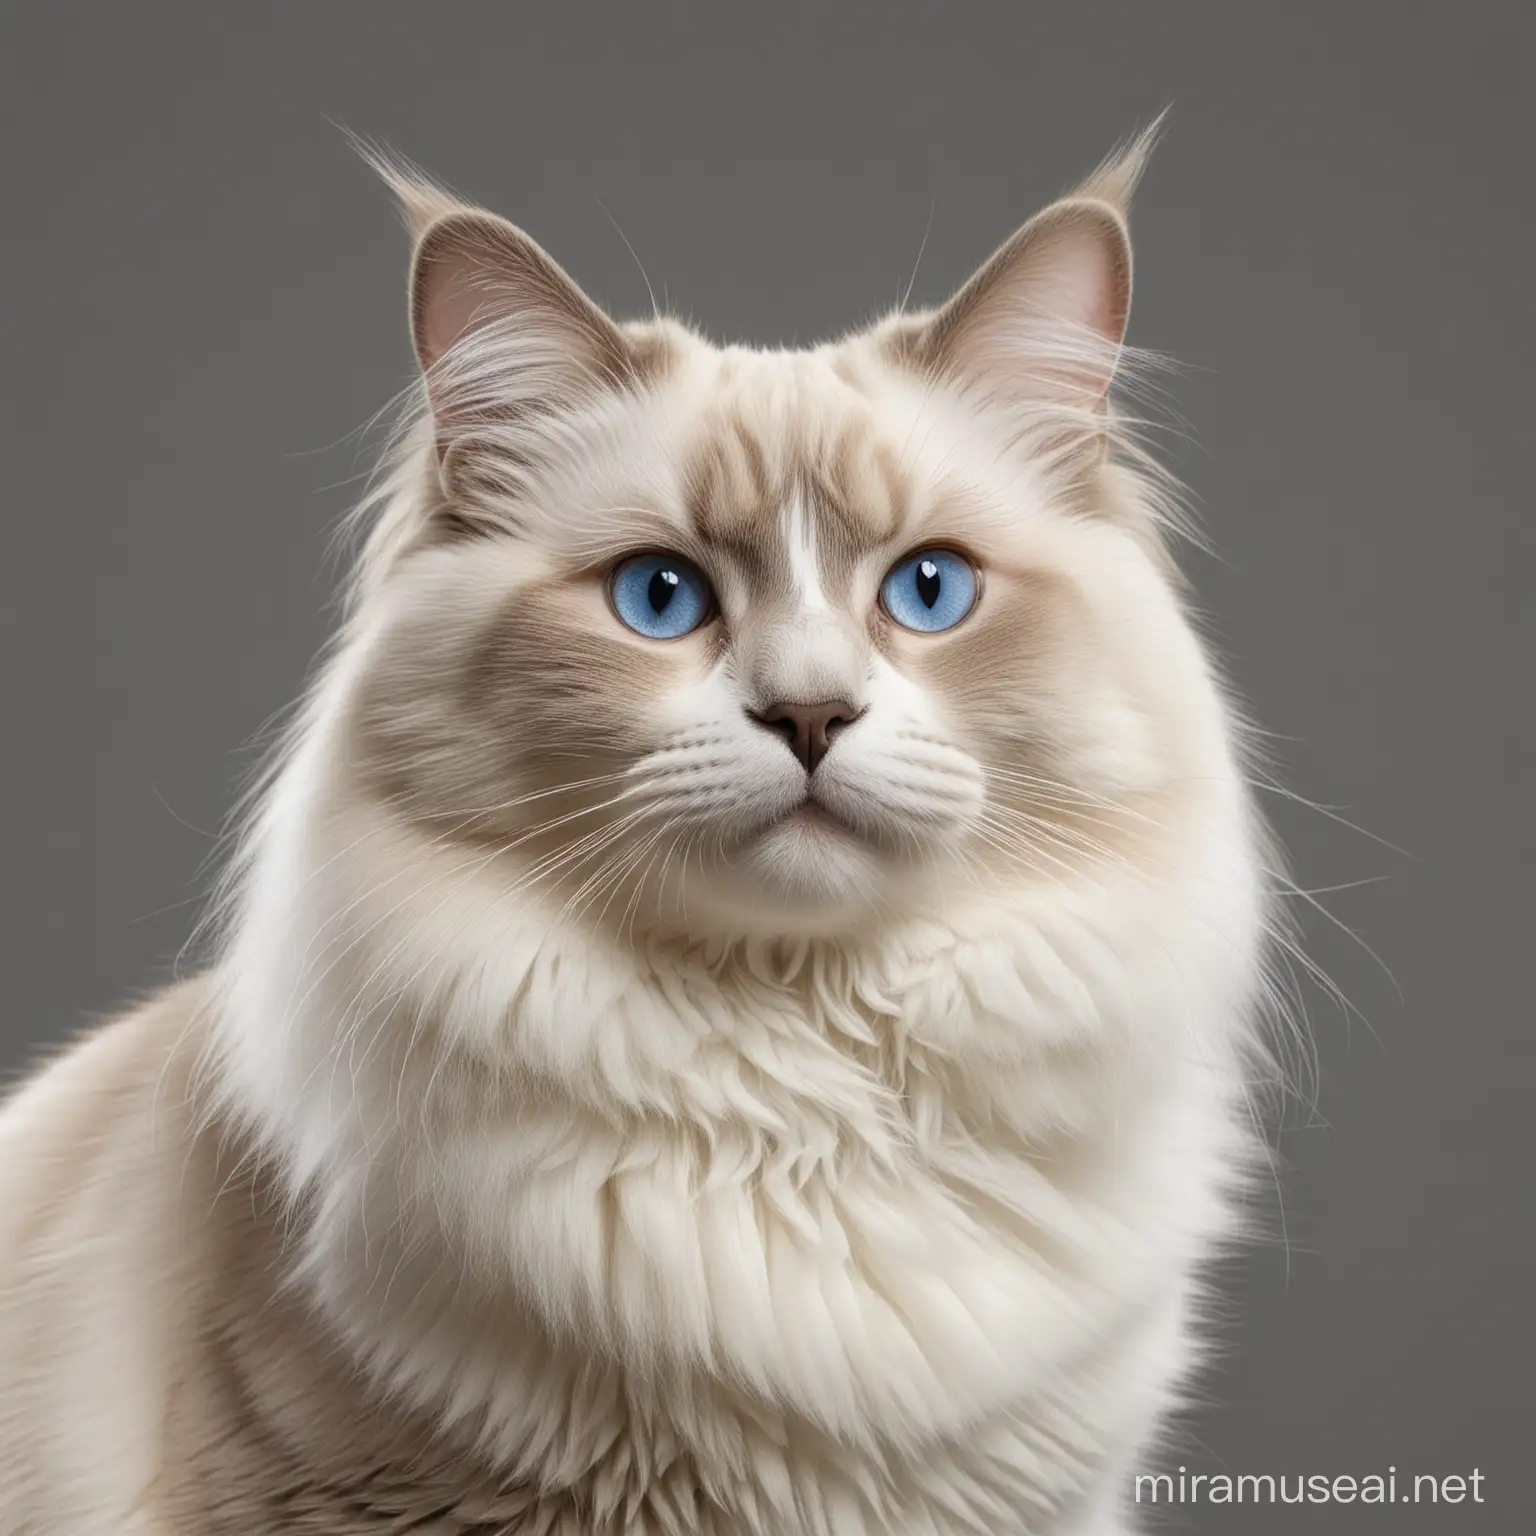 Ragdoll cat, photo taken in studio, cat shown in high detail on clear png file